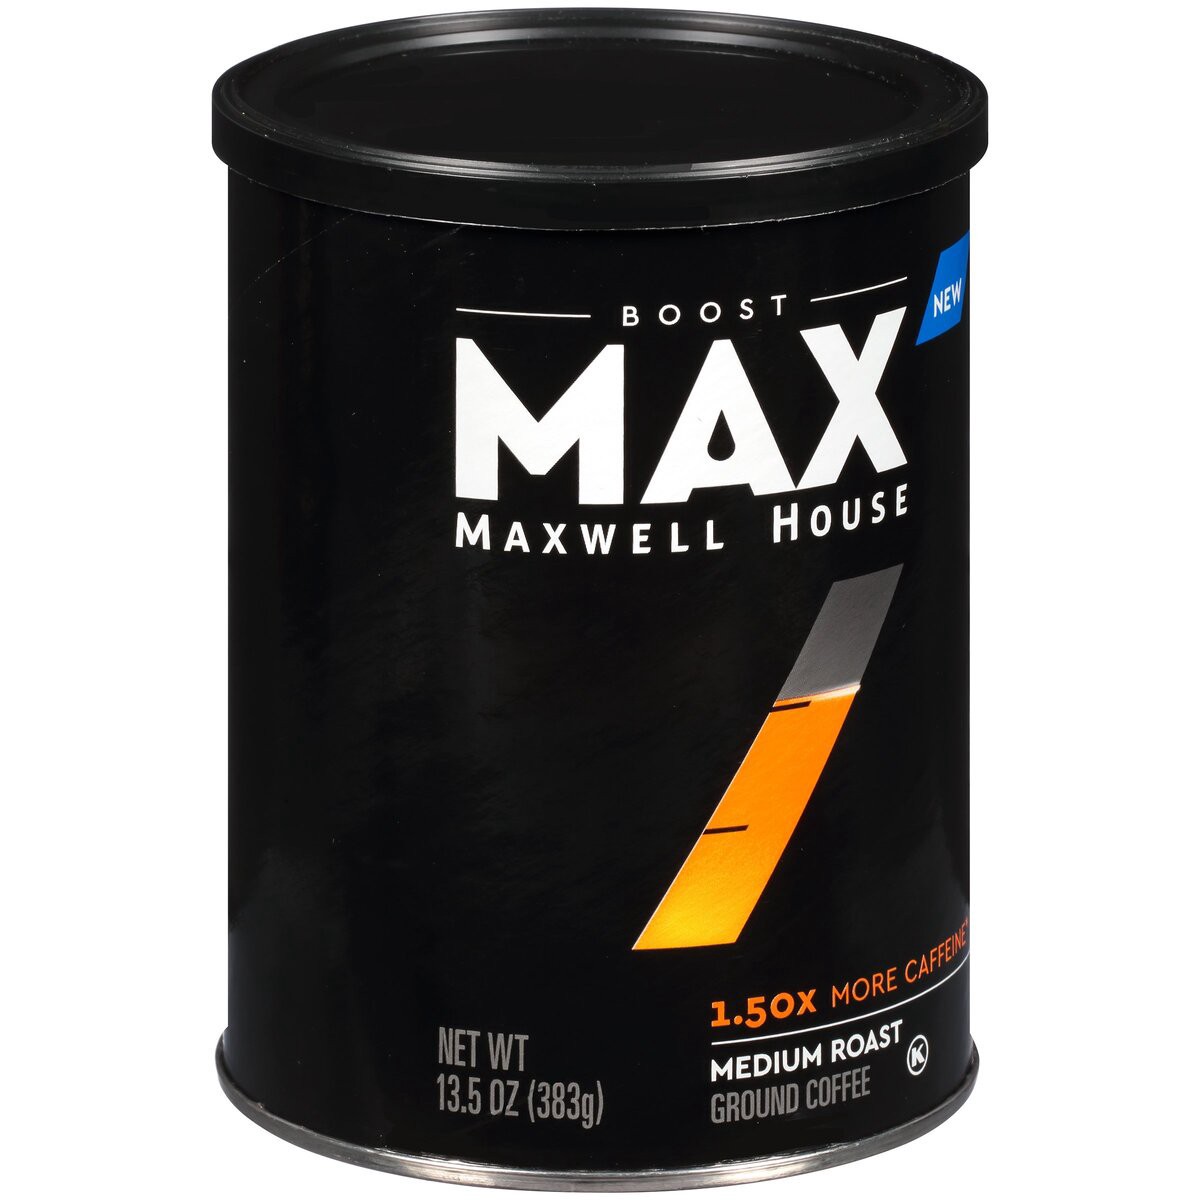 slide 7 of 7, Maxwell House Max Boost Medium Roast Ground Coffee with 1.50X More Caffeine, 13.5 oz Canister, 13.5 oz